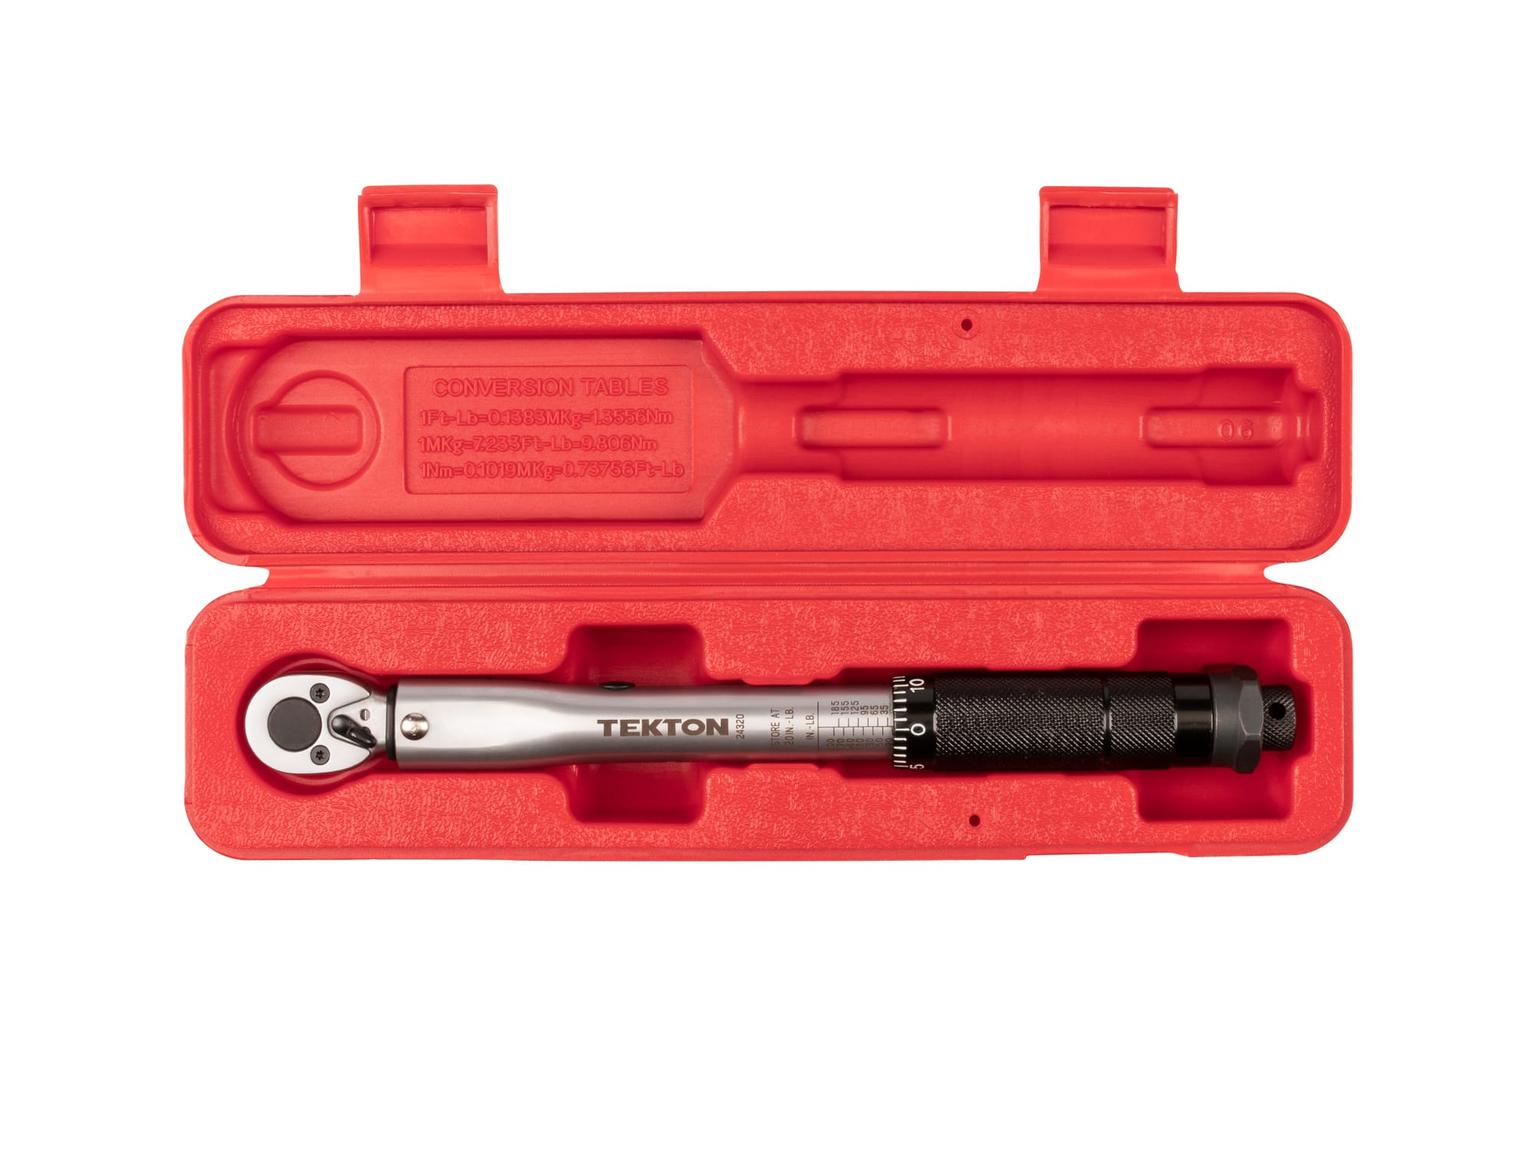 TEKTON 24320-D 1/4 Inch Drive Micrometer Torque Wrench (20-200 in.-lb.)